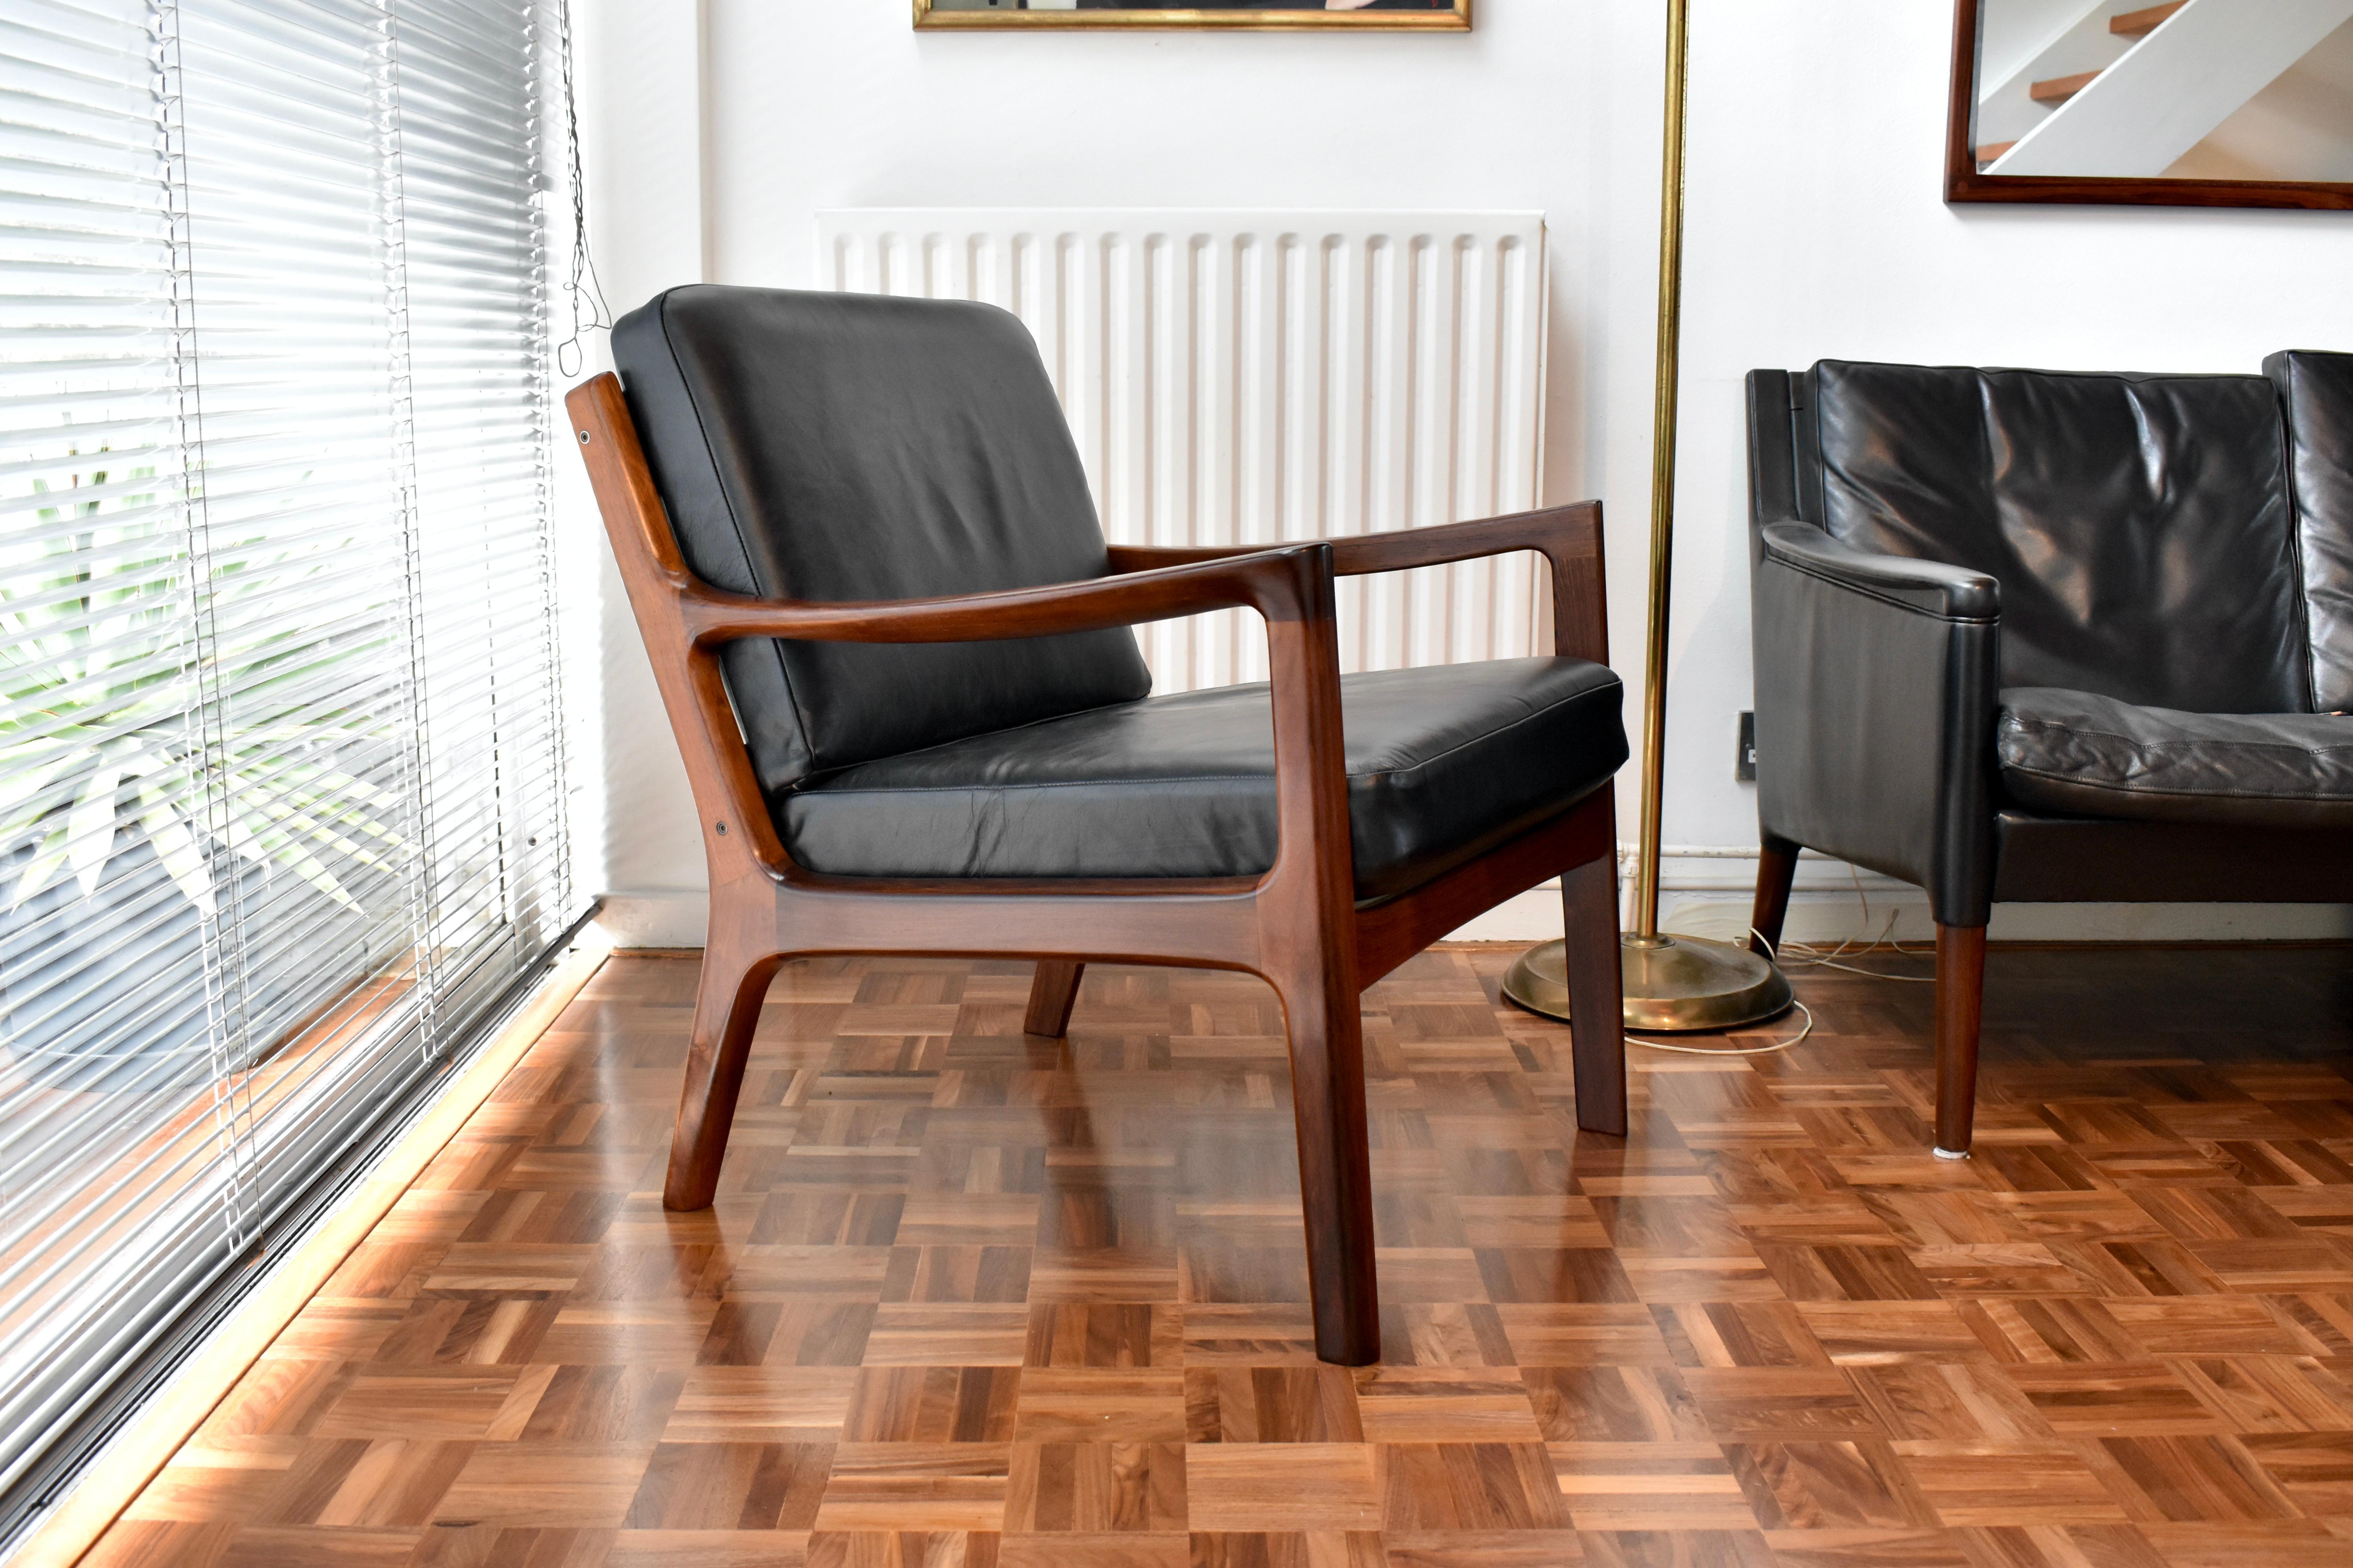 Beautiful Model 166 ‘Senator’ chair designed by Ole Wanscher for France & Son, Denmark.

Produced from solid Brazilian Rosewood this design looks absolutely stunning executed in this timber. Only a relatively small amount of chairs were produced in